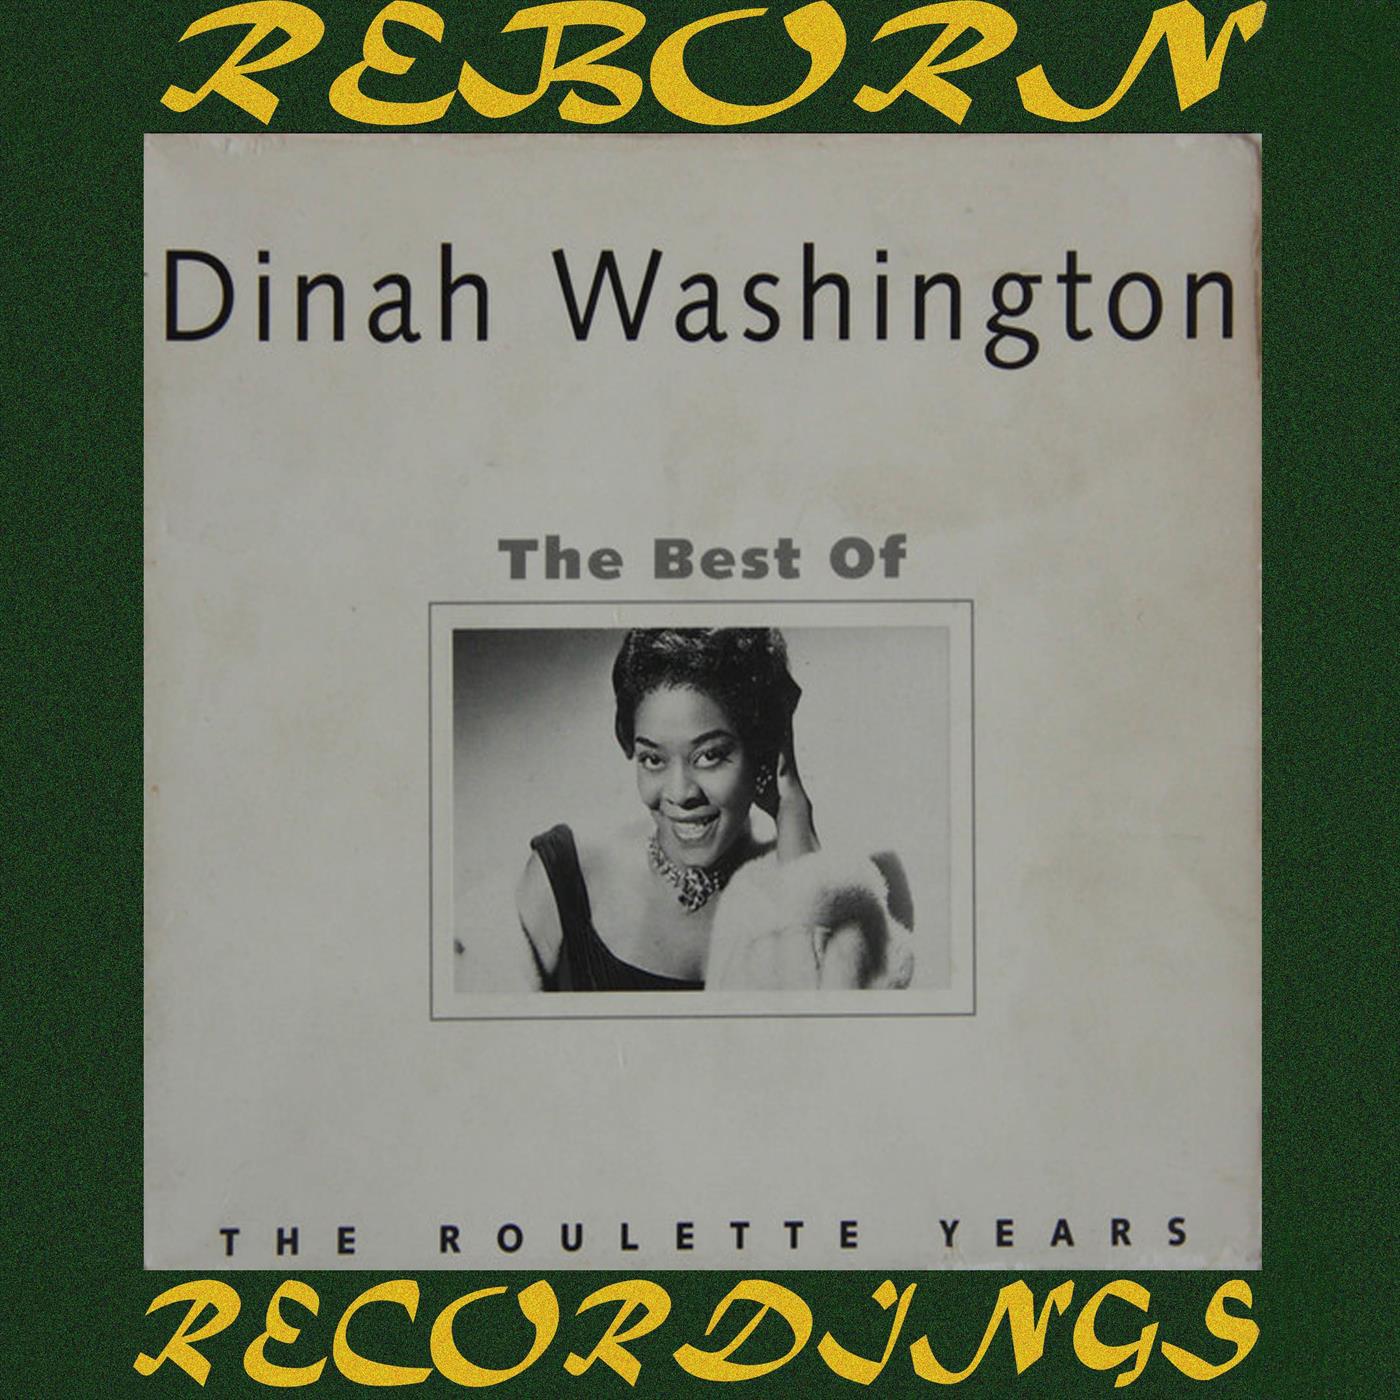 The Best of Dinah Washington [Roulette] (HD Remastered)